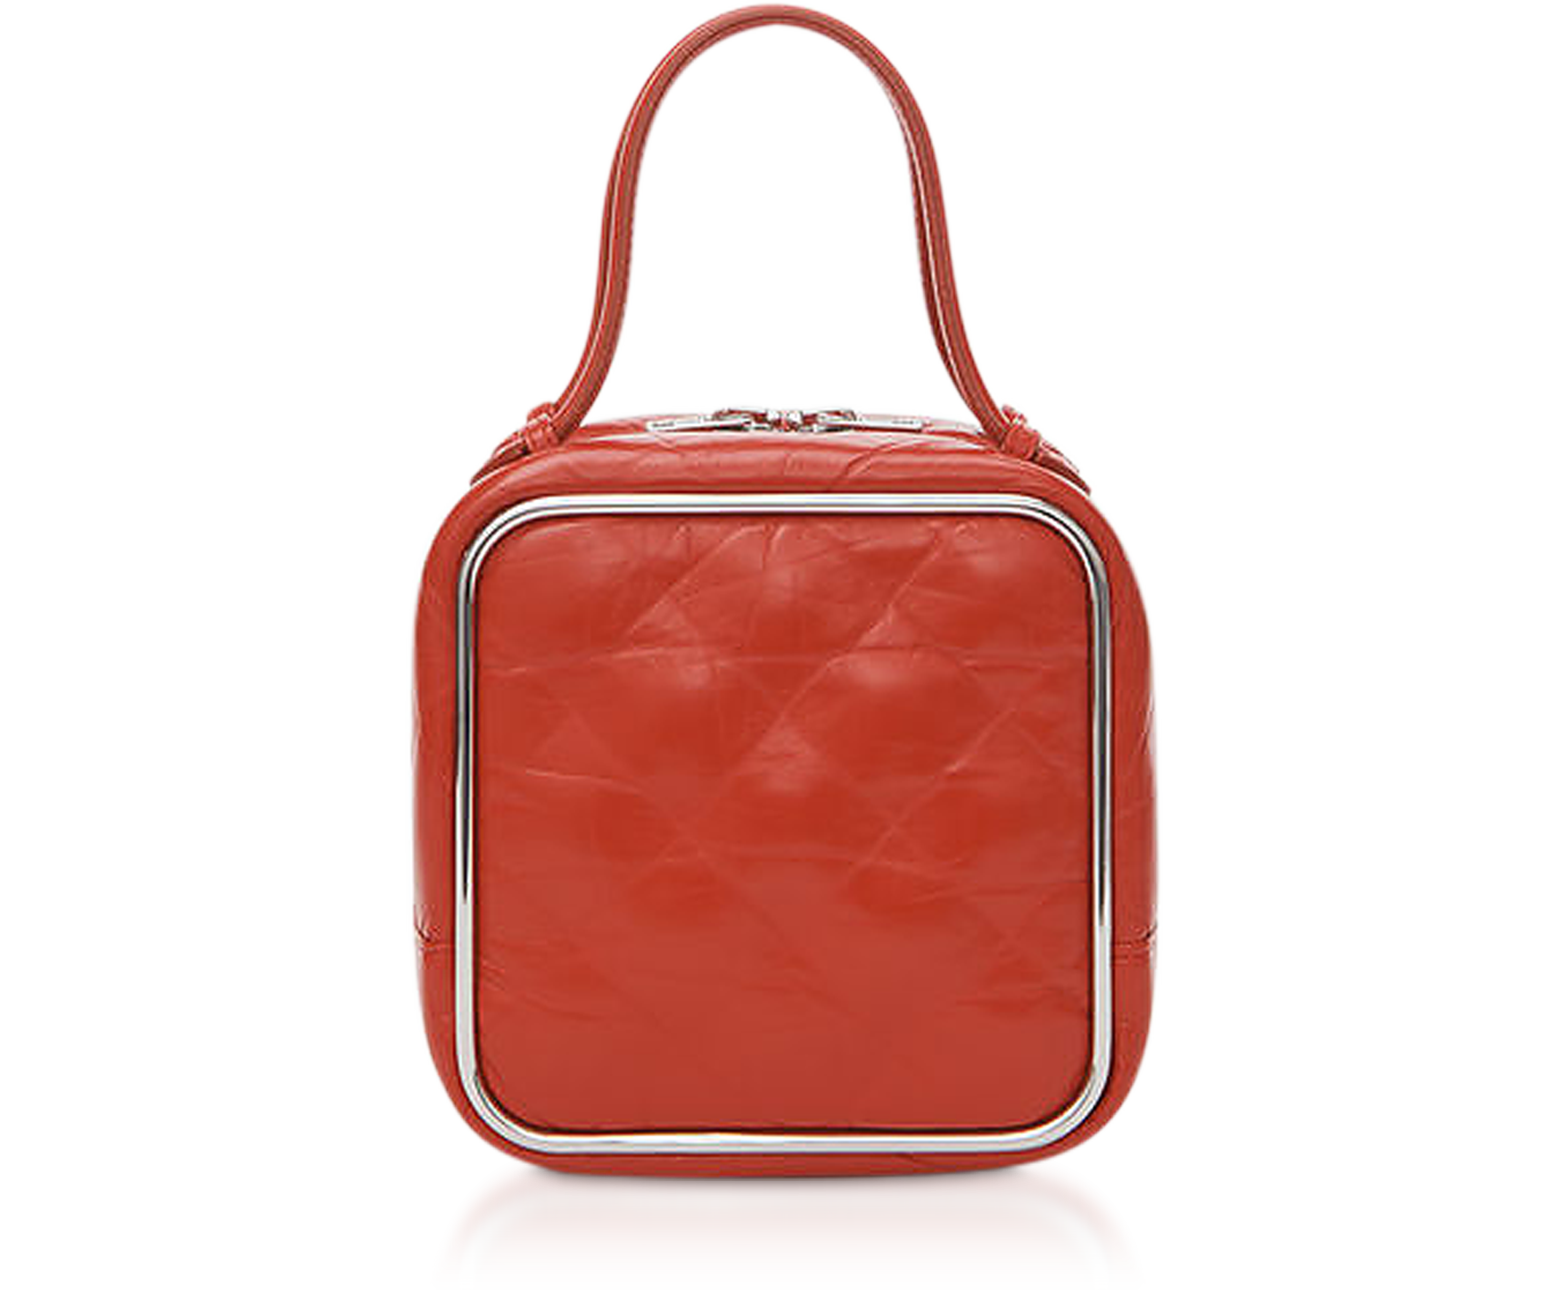 Alexander Wang Red Quilted Leather Halo Handle Satchel Bag at FORZIERI